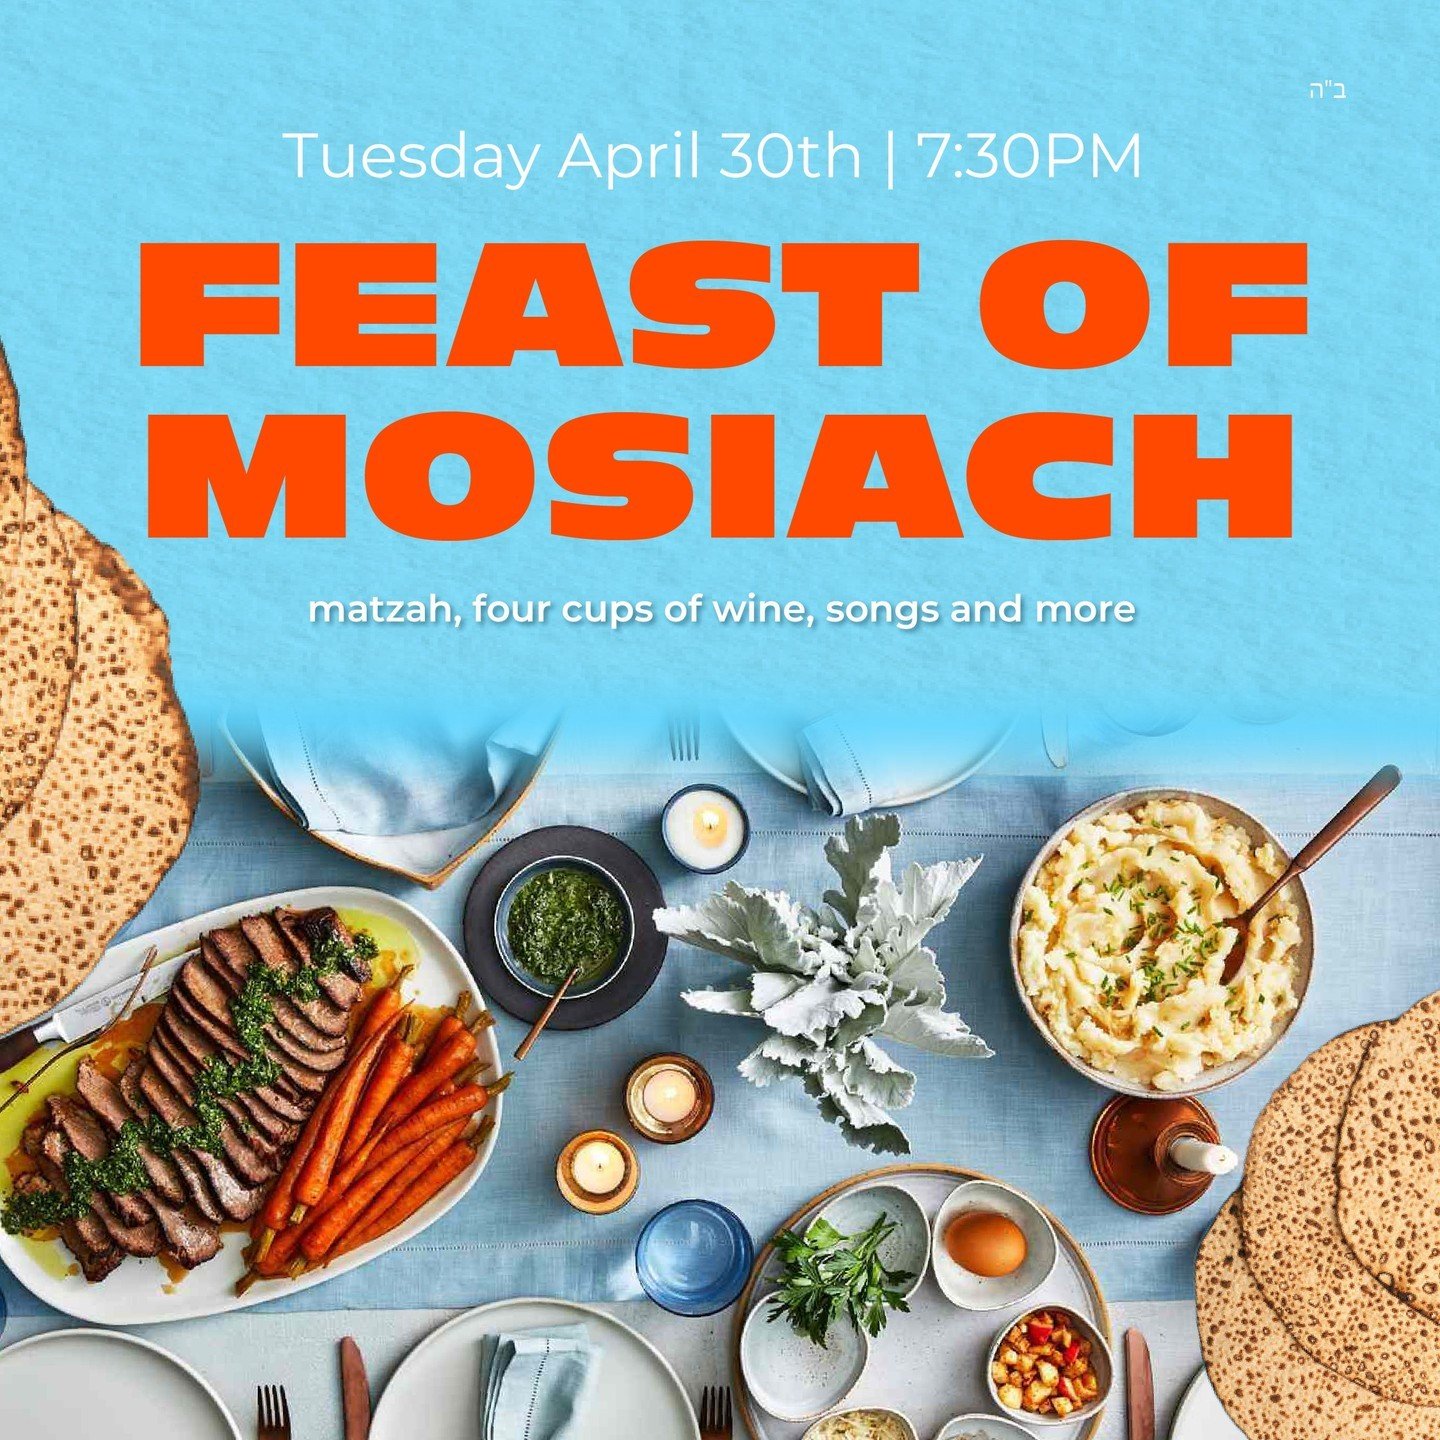 On the last day of Passover, the focus is on the future liberation, and the haftorah is a prophecy of that era. To celebrate, the Baal Shem Tov initiated the Feast of Moshiach, a festive meal.
ㅤ
Just us for wine, songs and inspiration on the final da